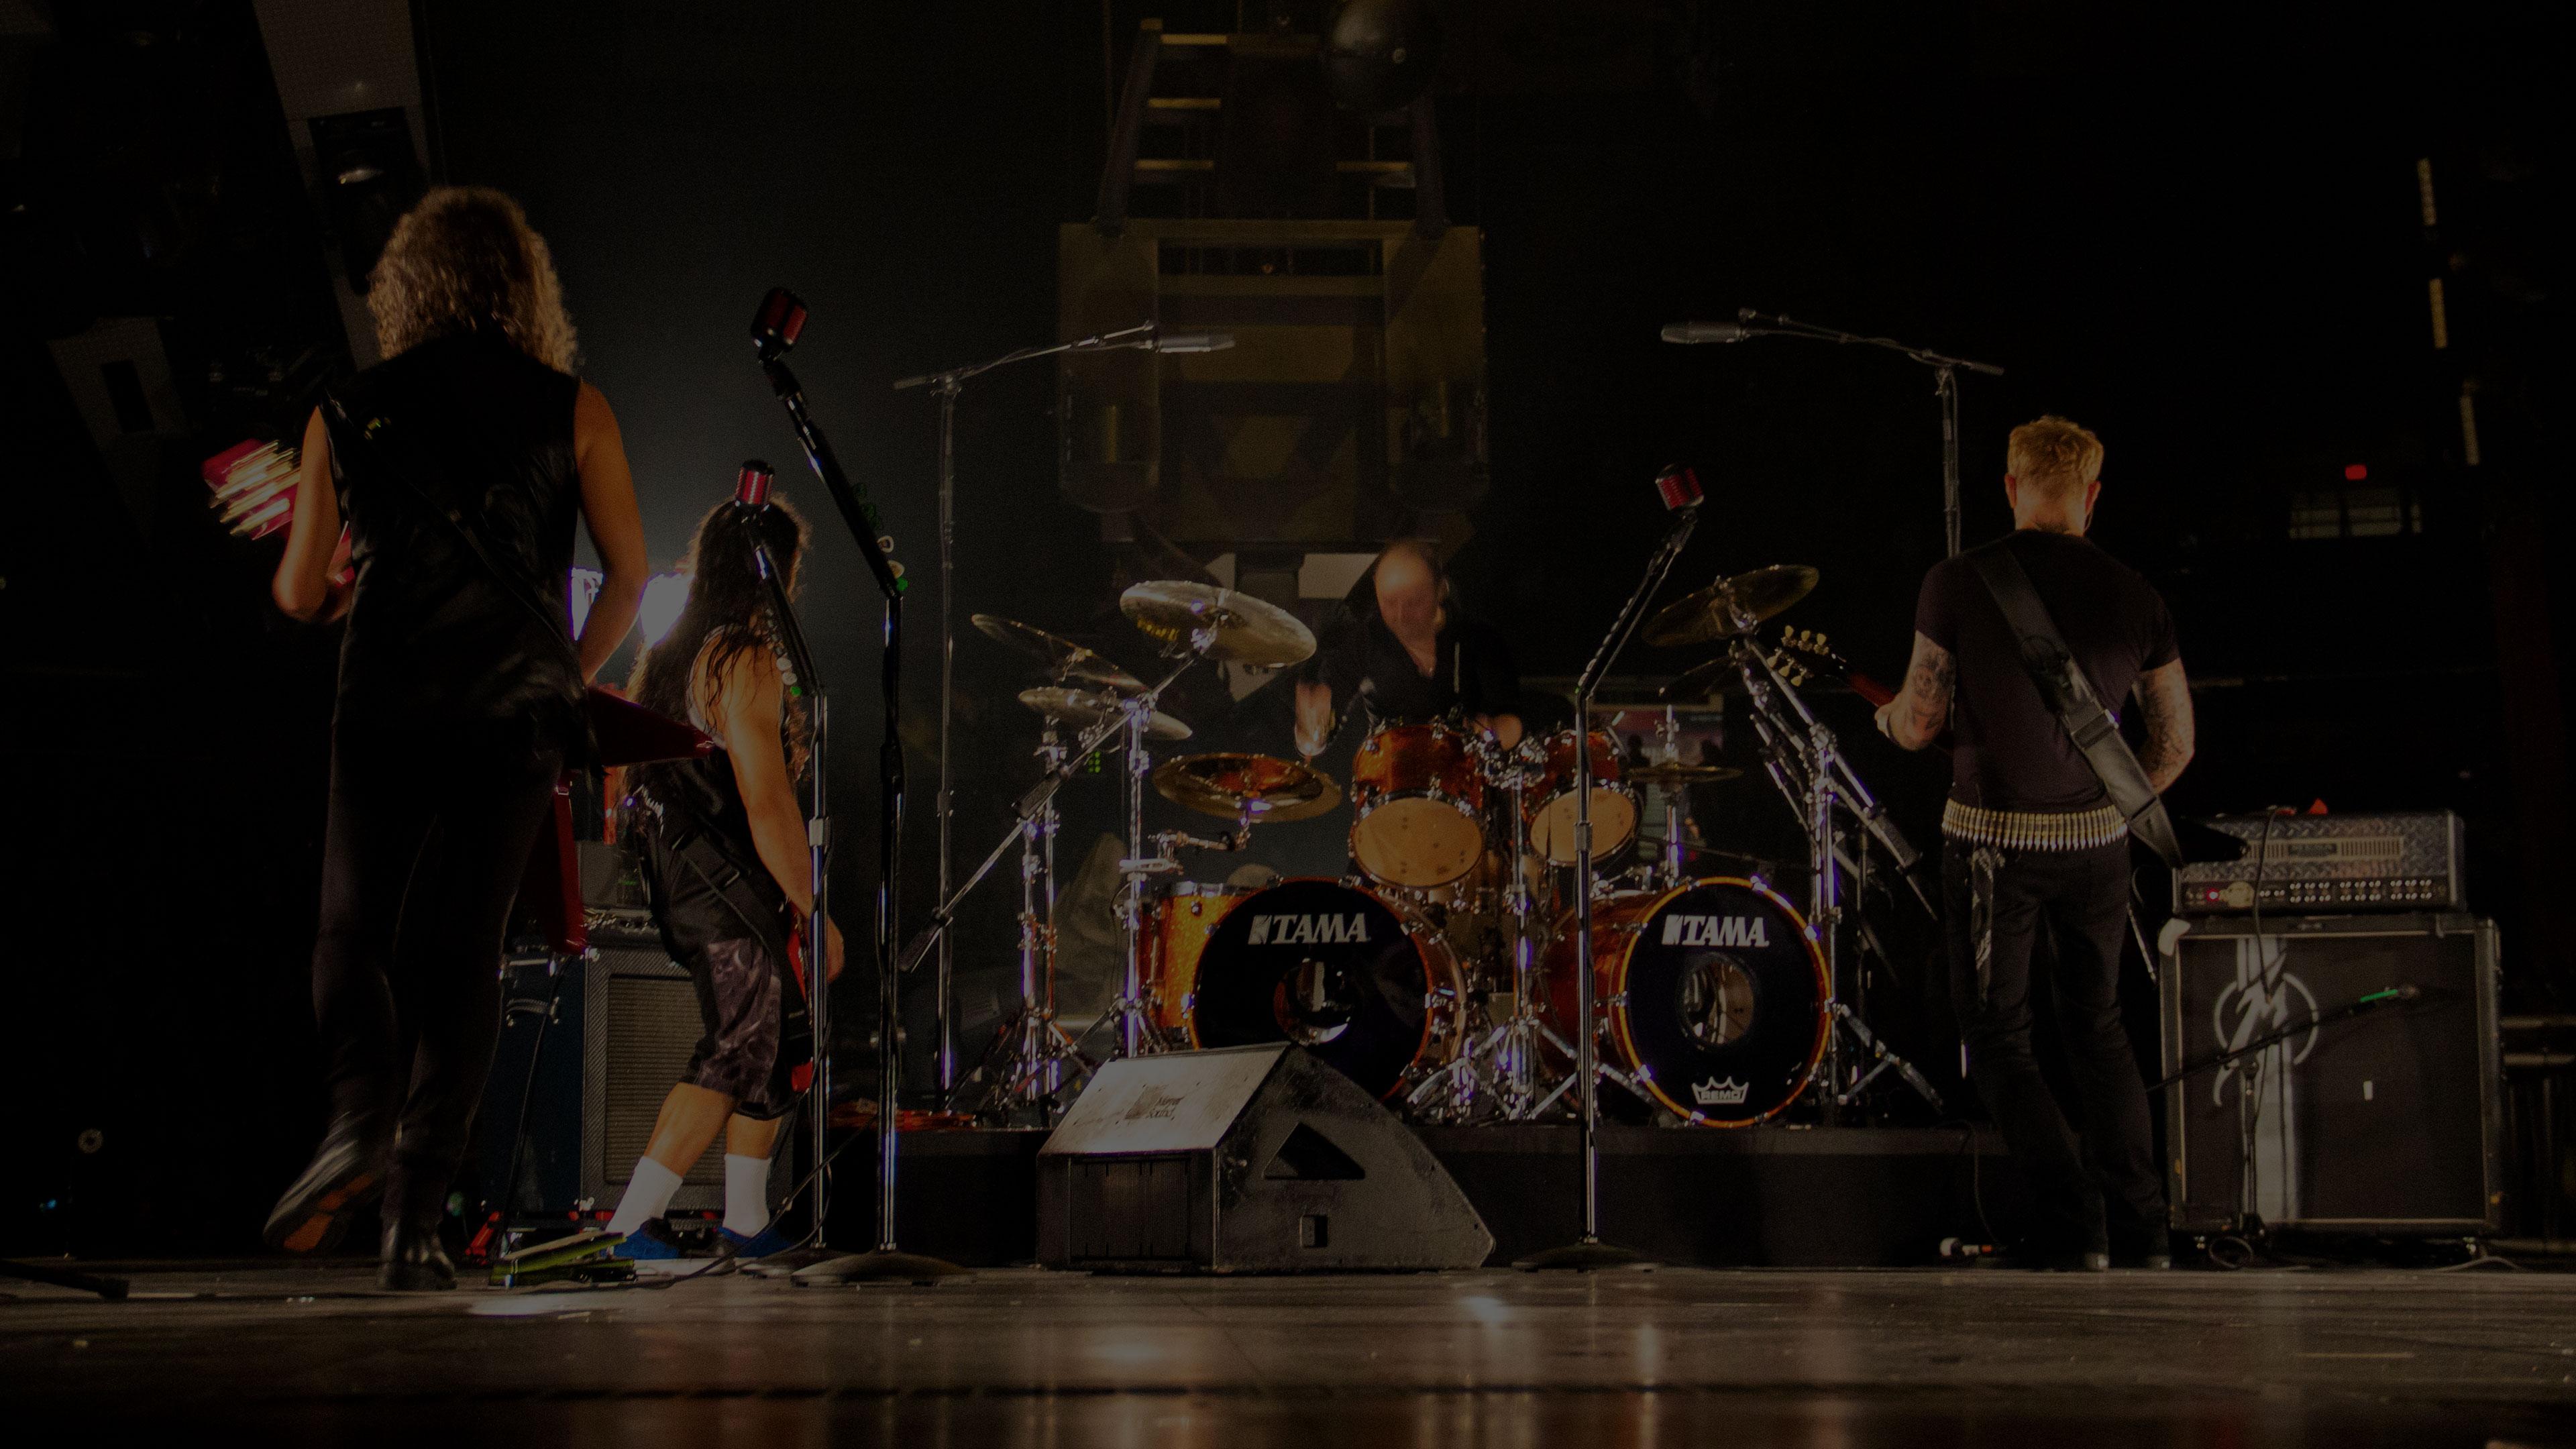 Banner Image for the photo gallery from the gig in Edmonton, AB, Canada shot on August 17, 2012